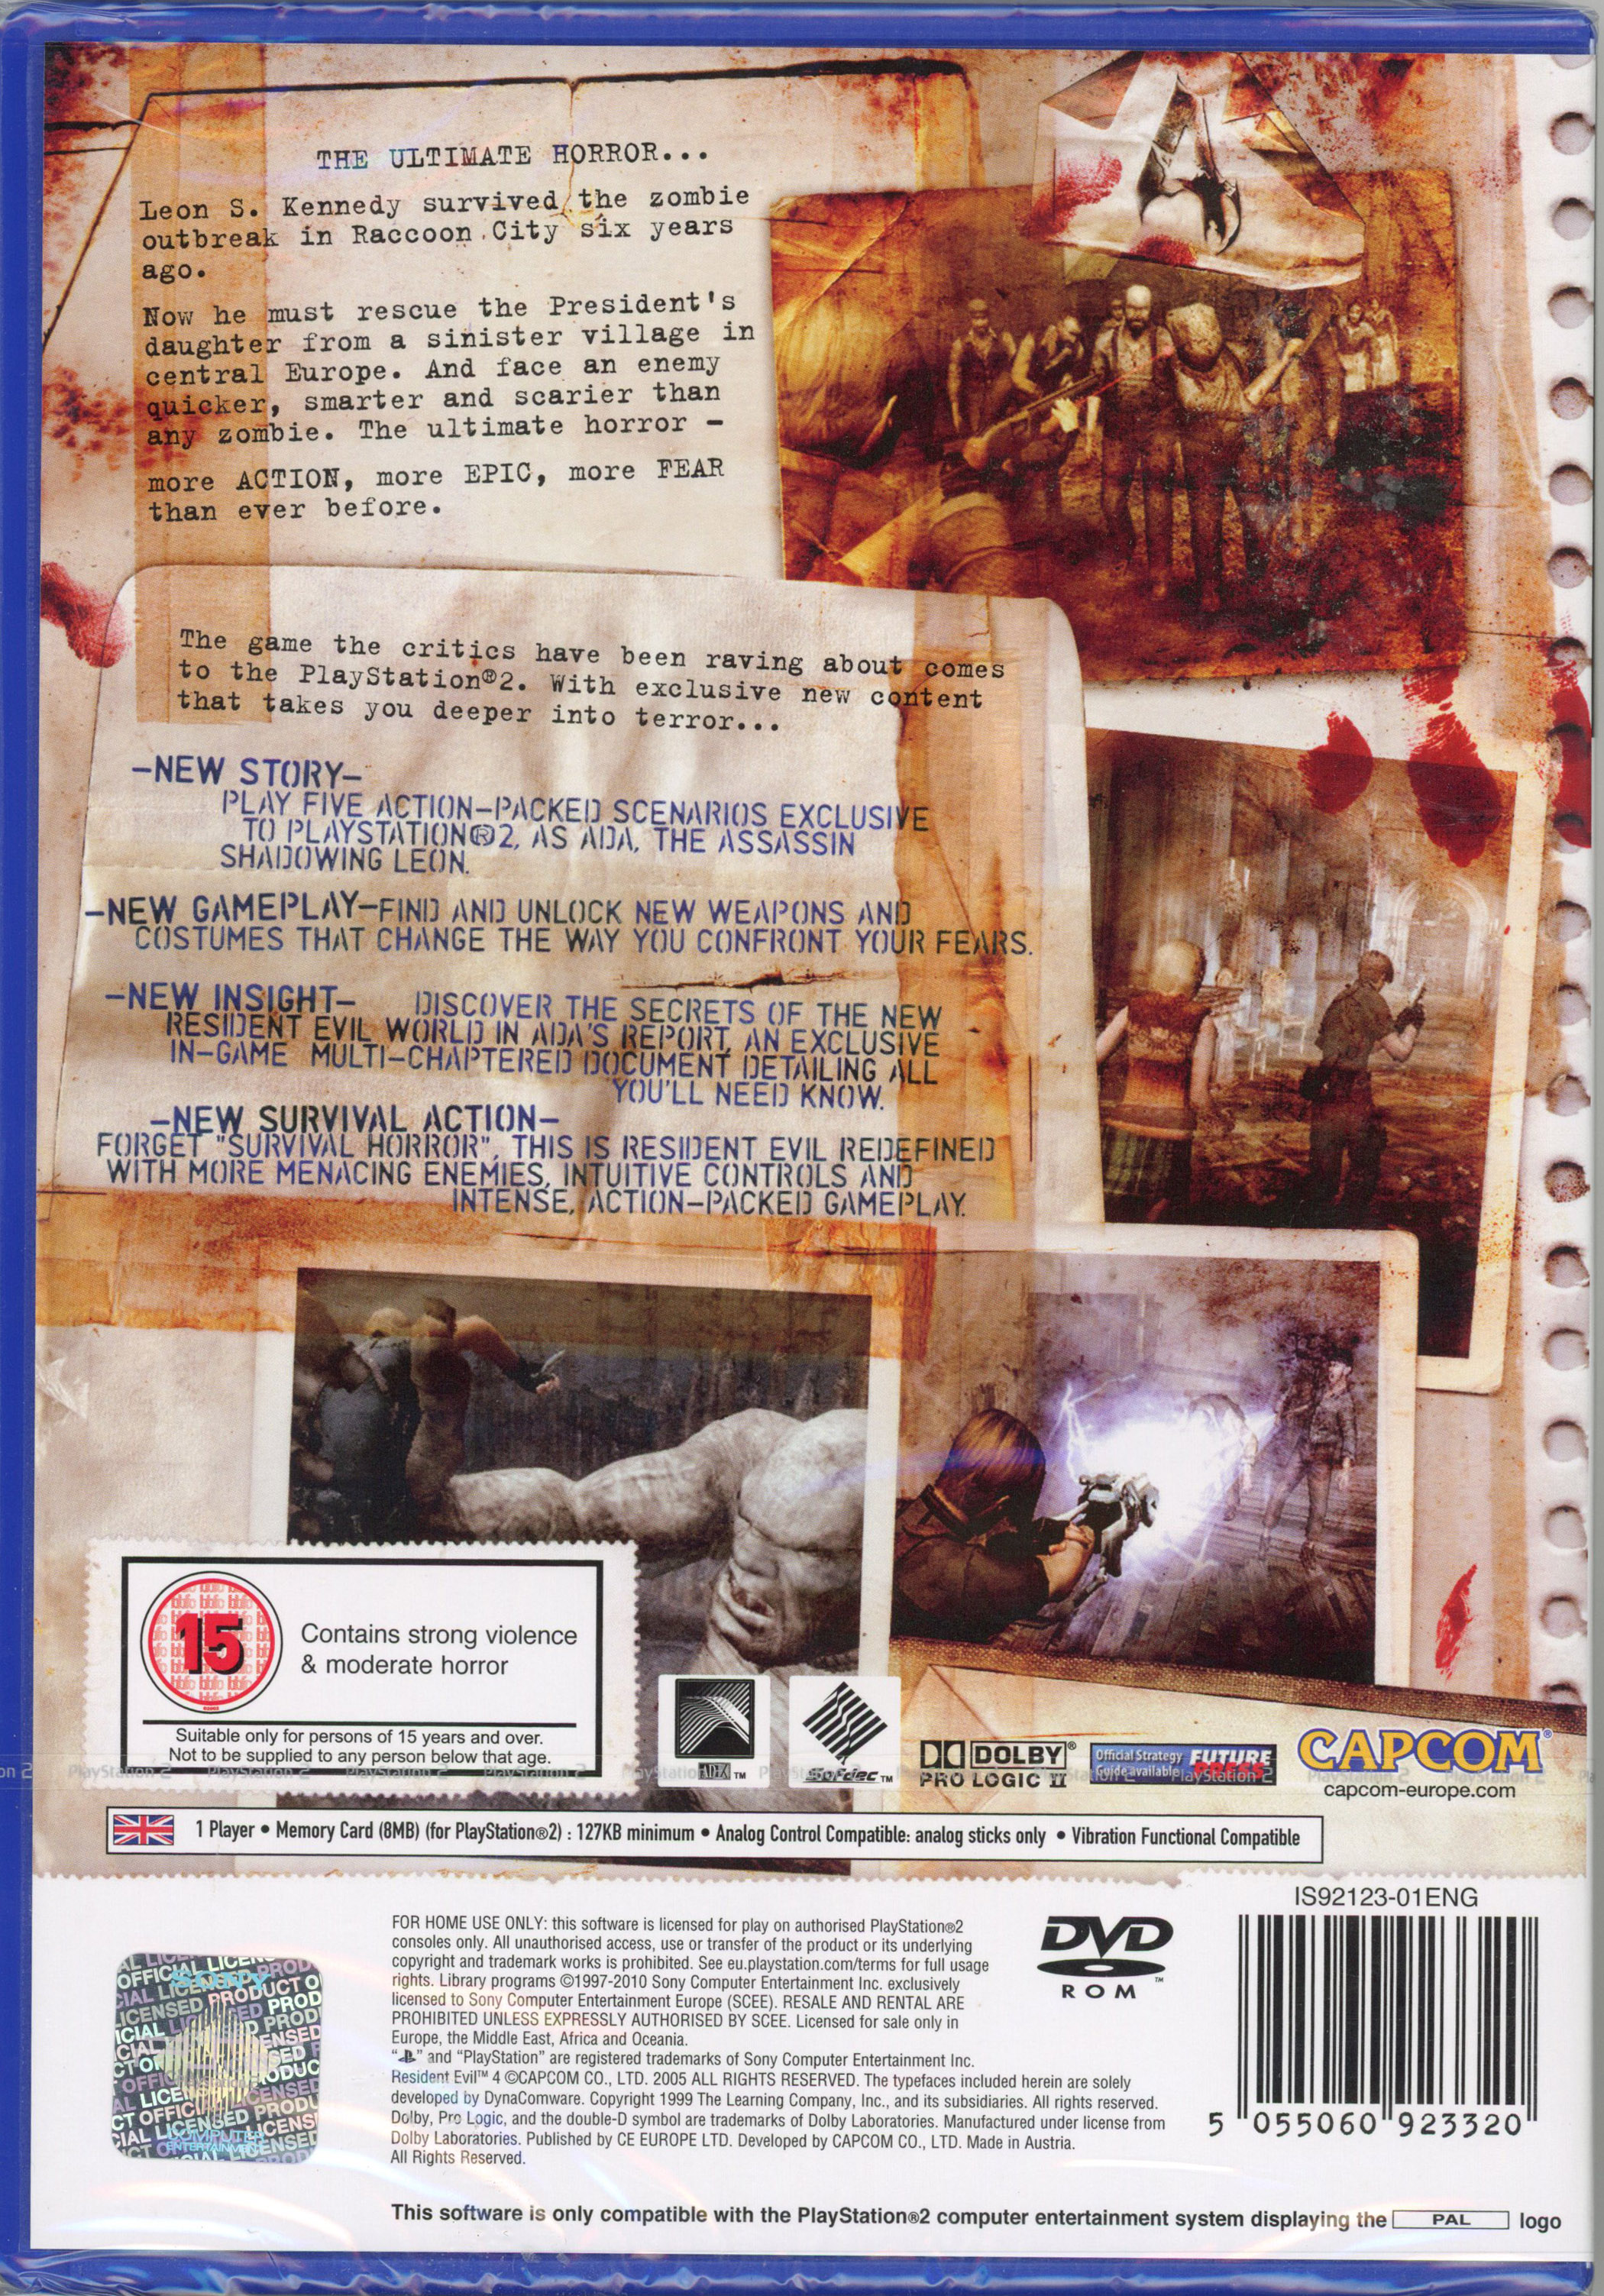 Sony - Resident Evil 4 - PlayStation 2 - Factory Sealed - Image 2 of 2